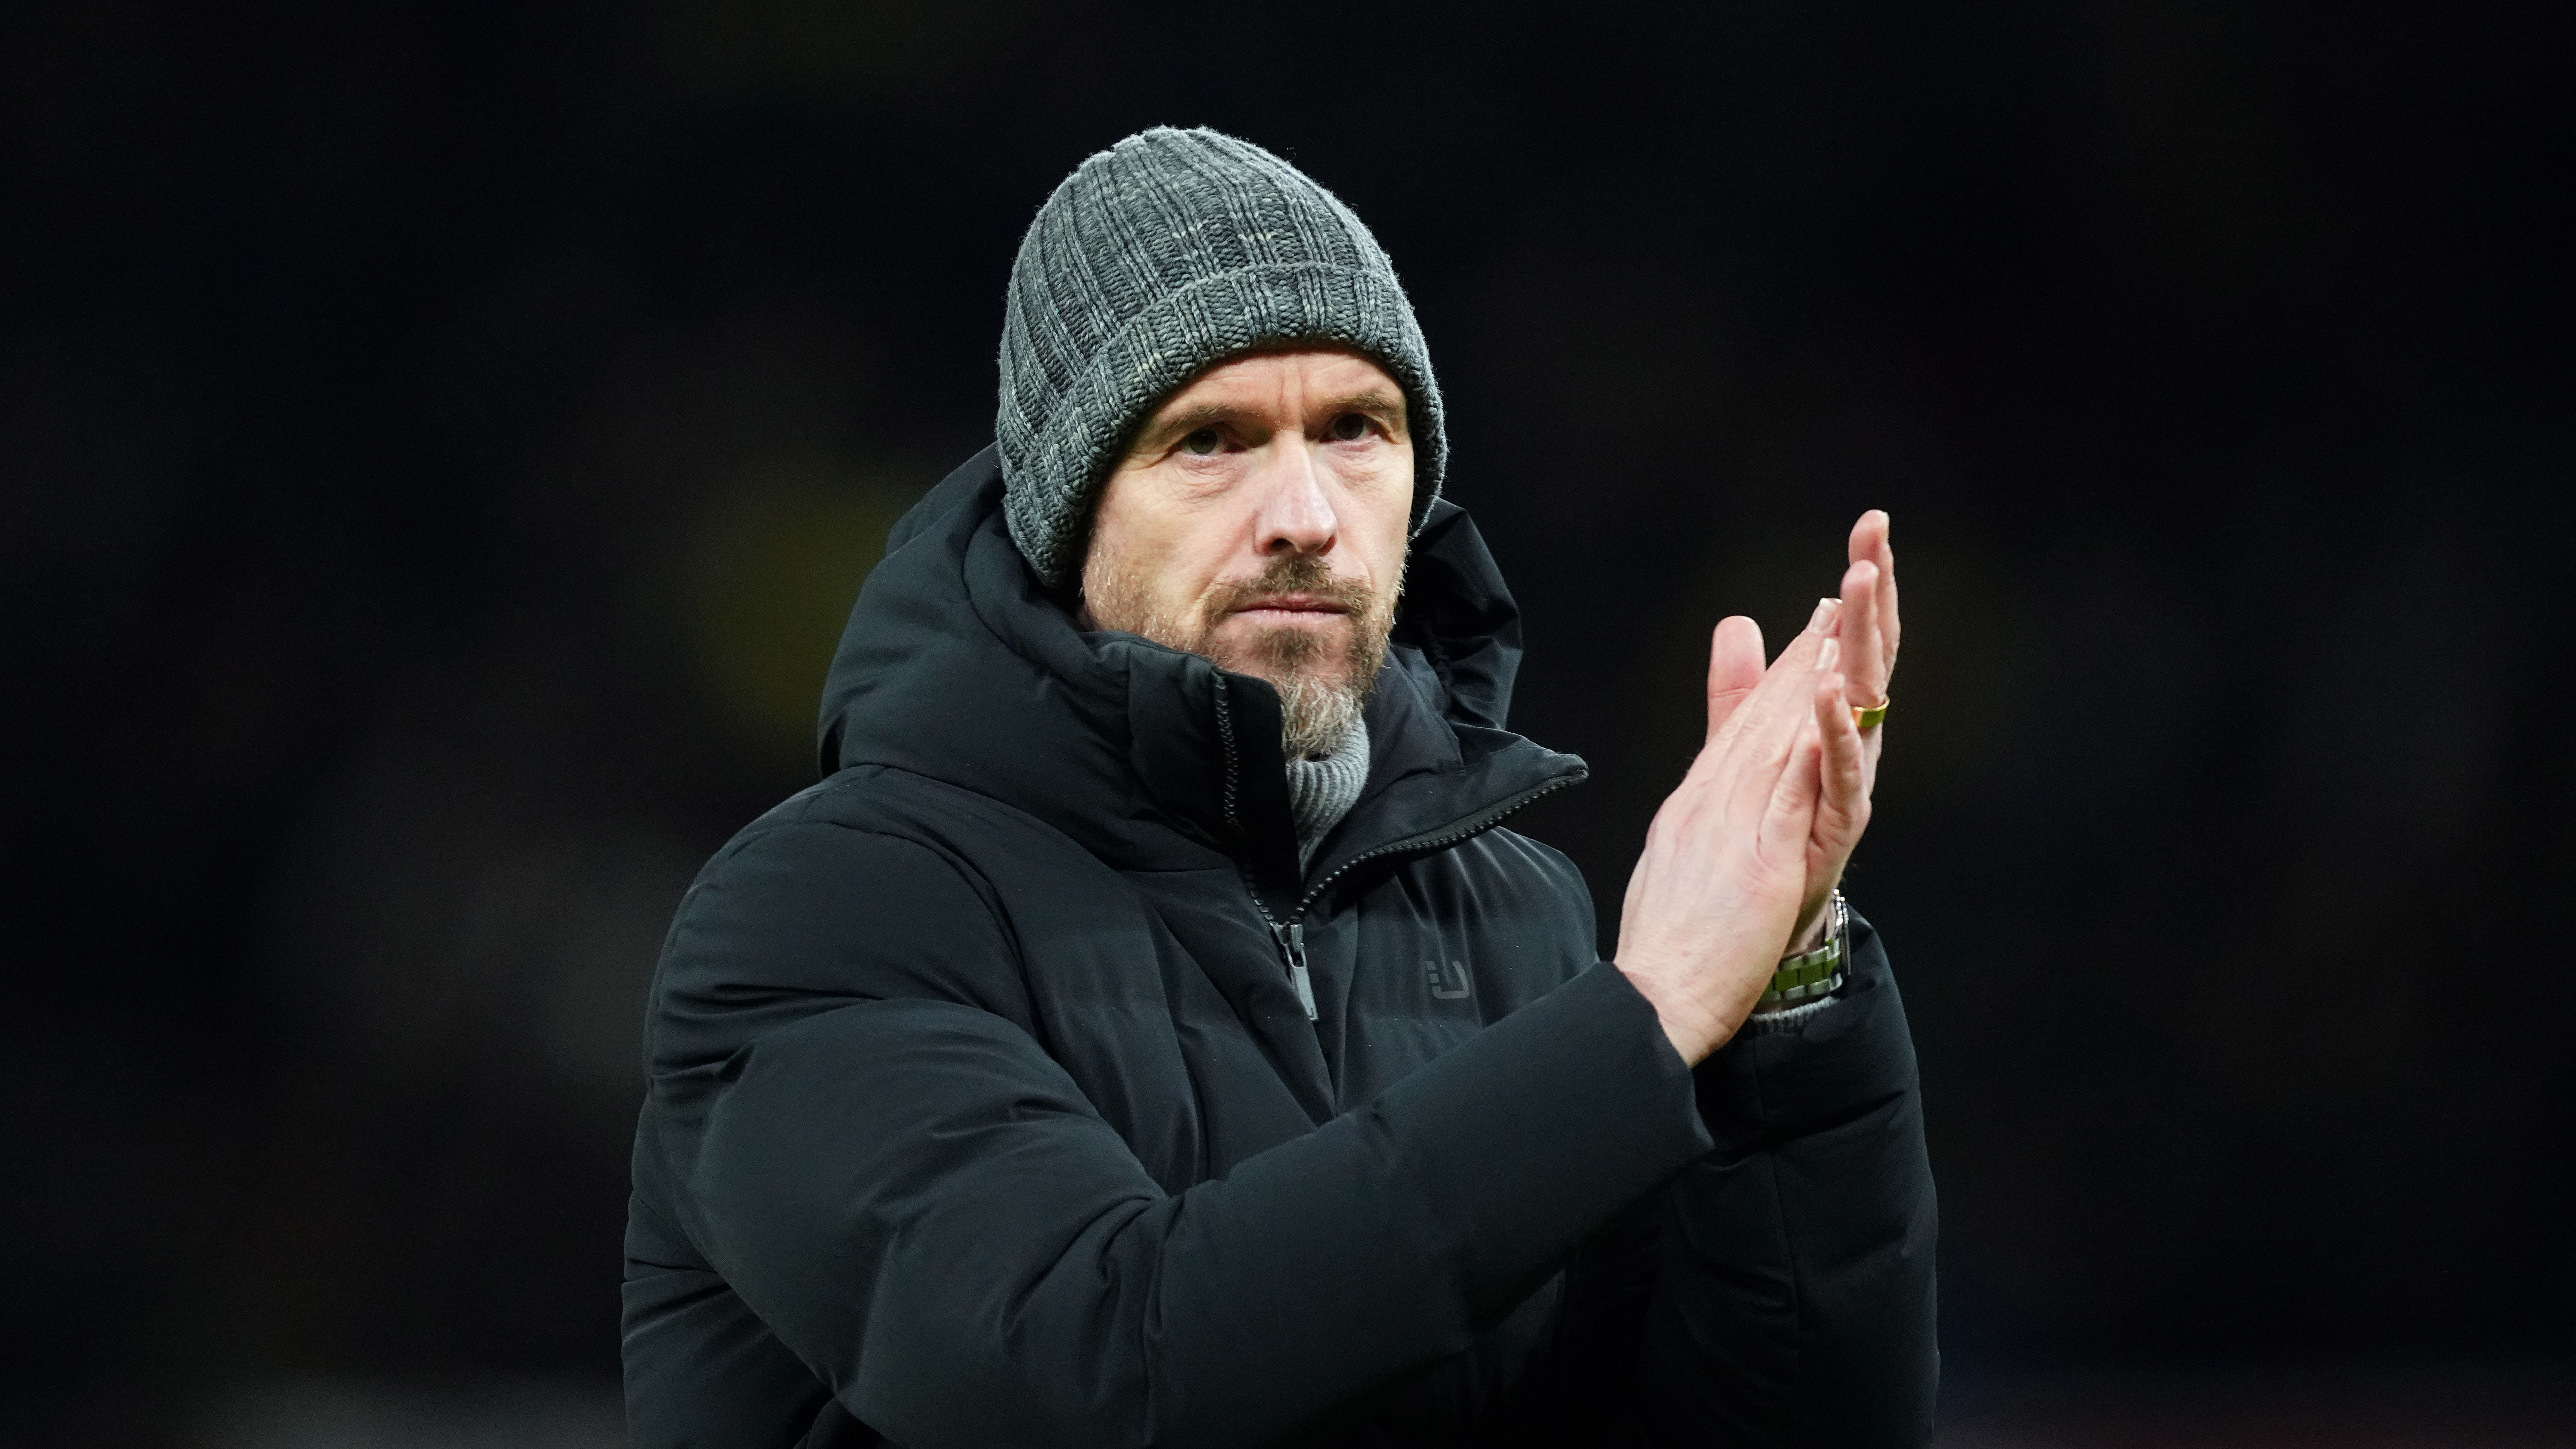 Erik ten Hag could select his strongest Man Utd team ‘for first time’ at Wolves